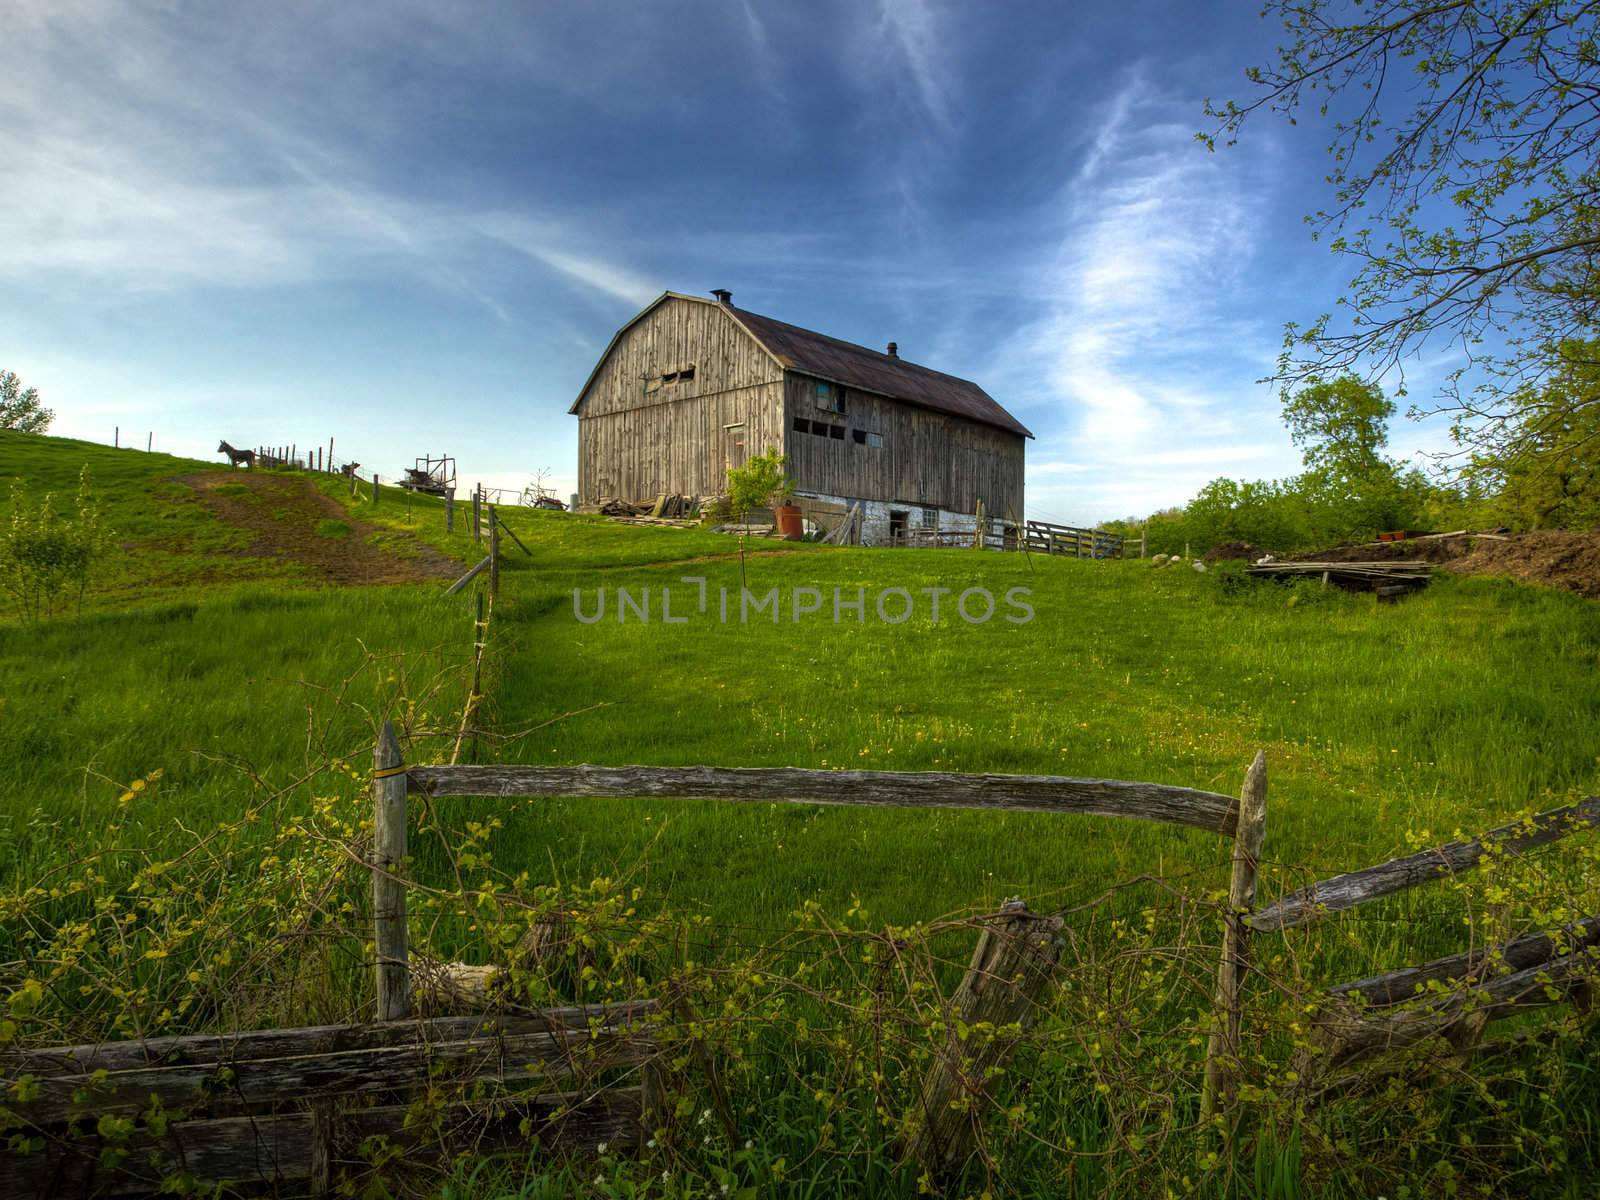 Rural Ontario farm scence of an old barn on a hill in spring time